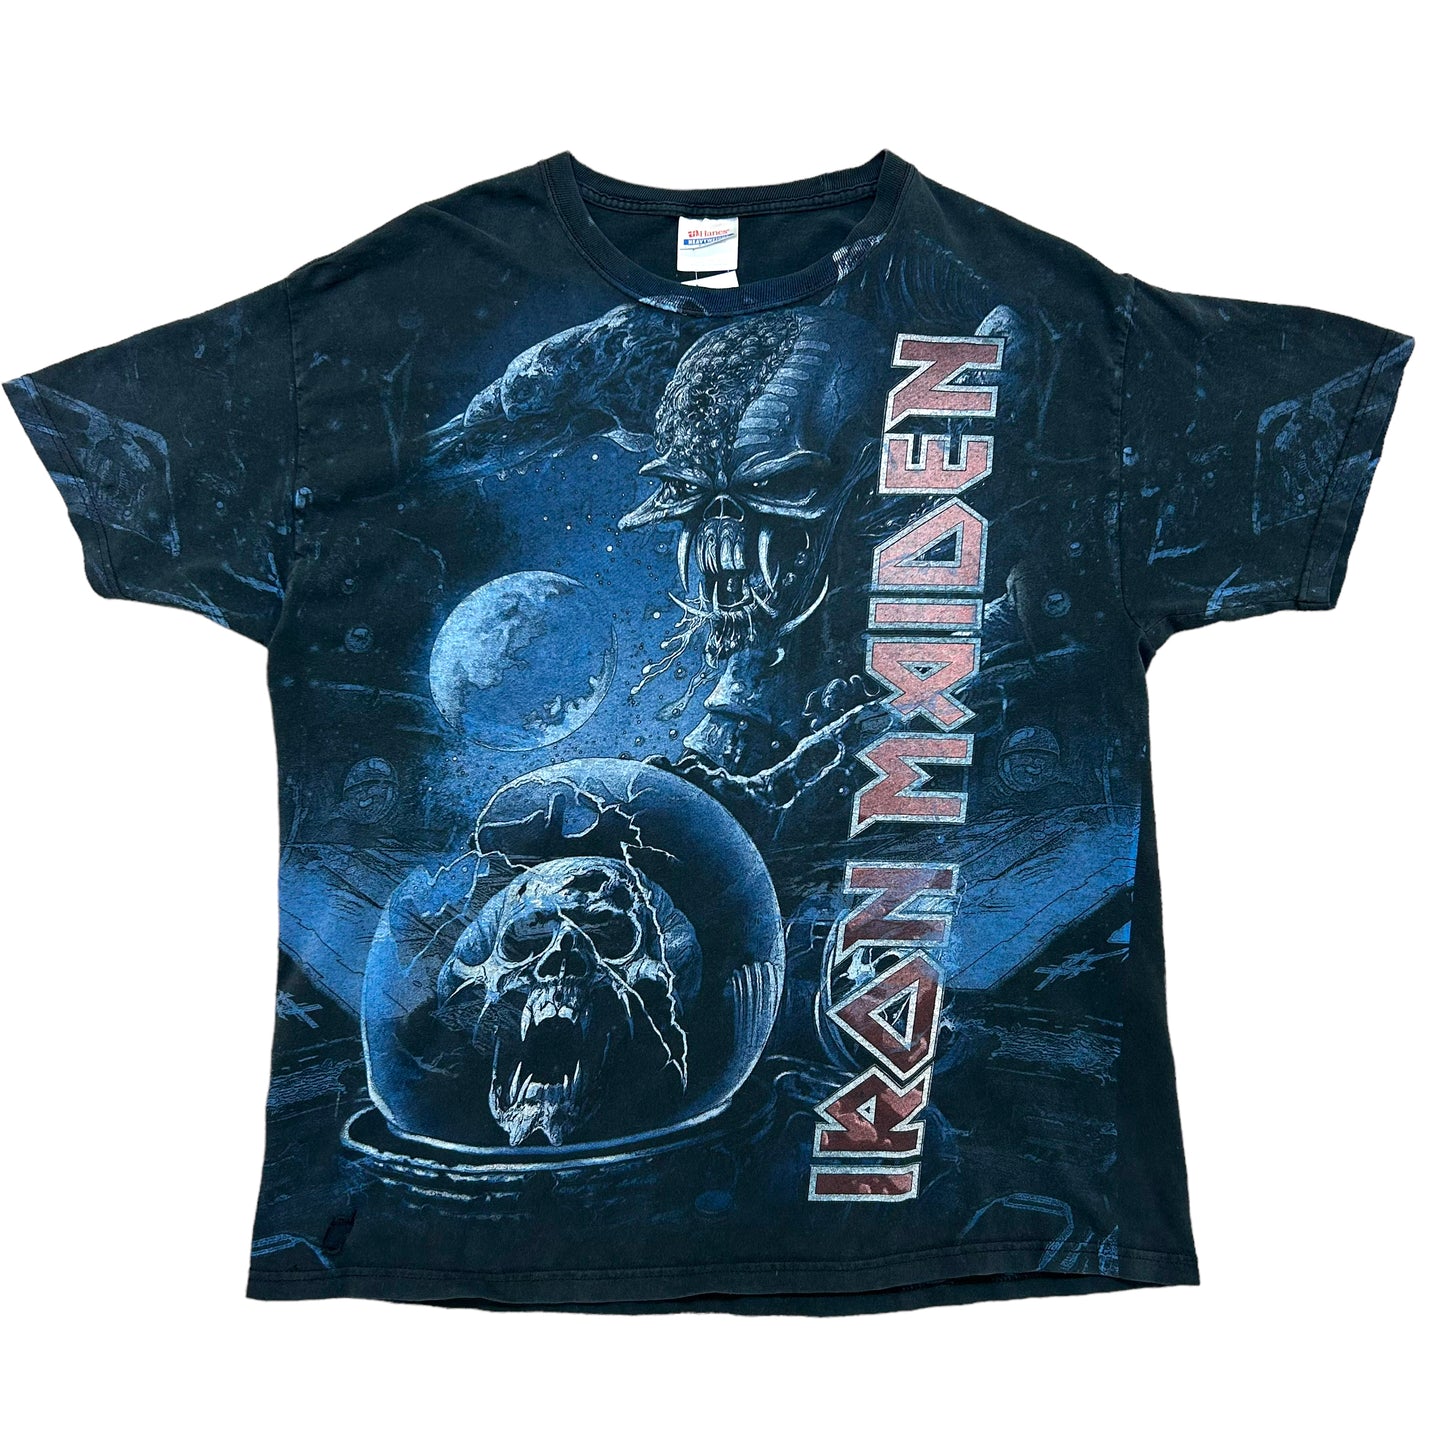 2010 Iron Maiden “The Final Frontier” All Over Print Black Graphic T-Shirt - Size XL